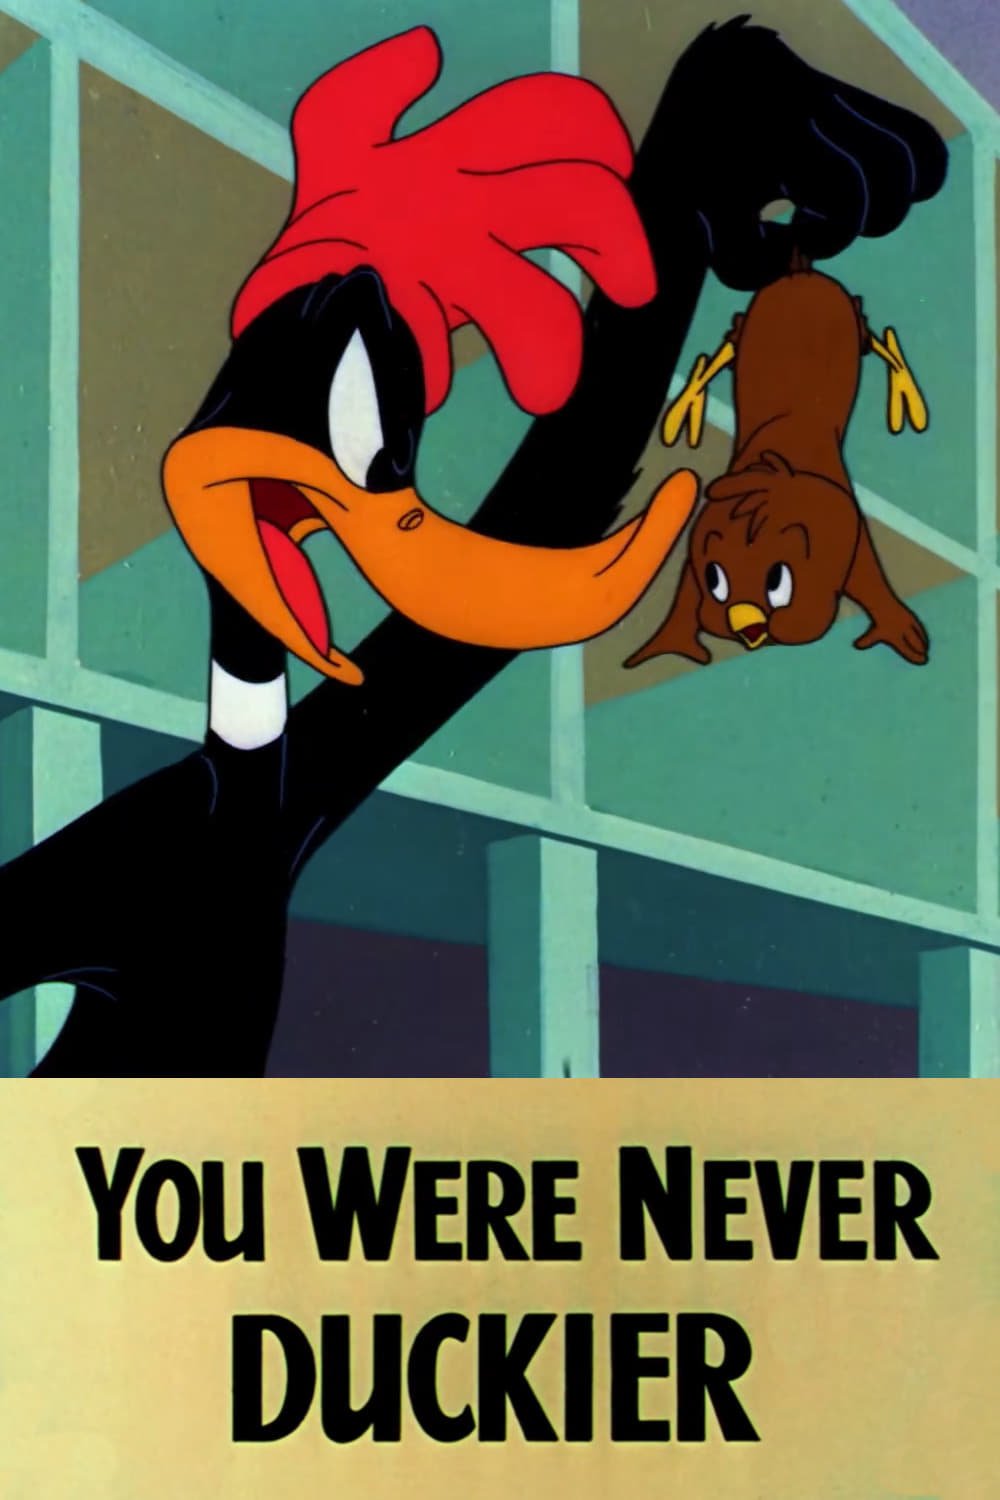 You Were Never Duckier (1948)